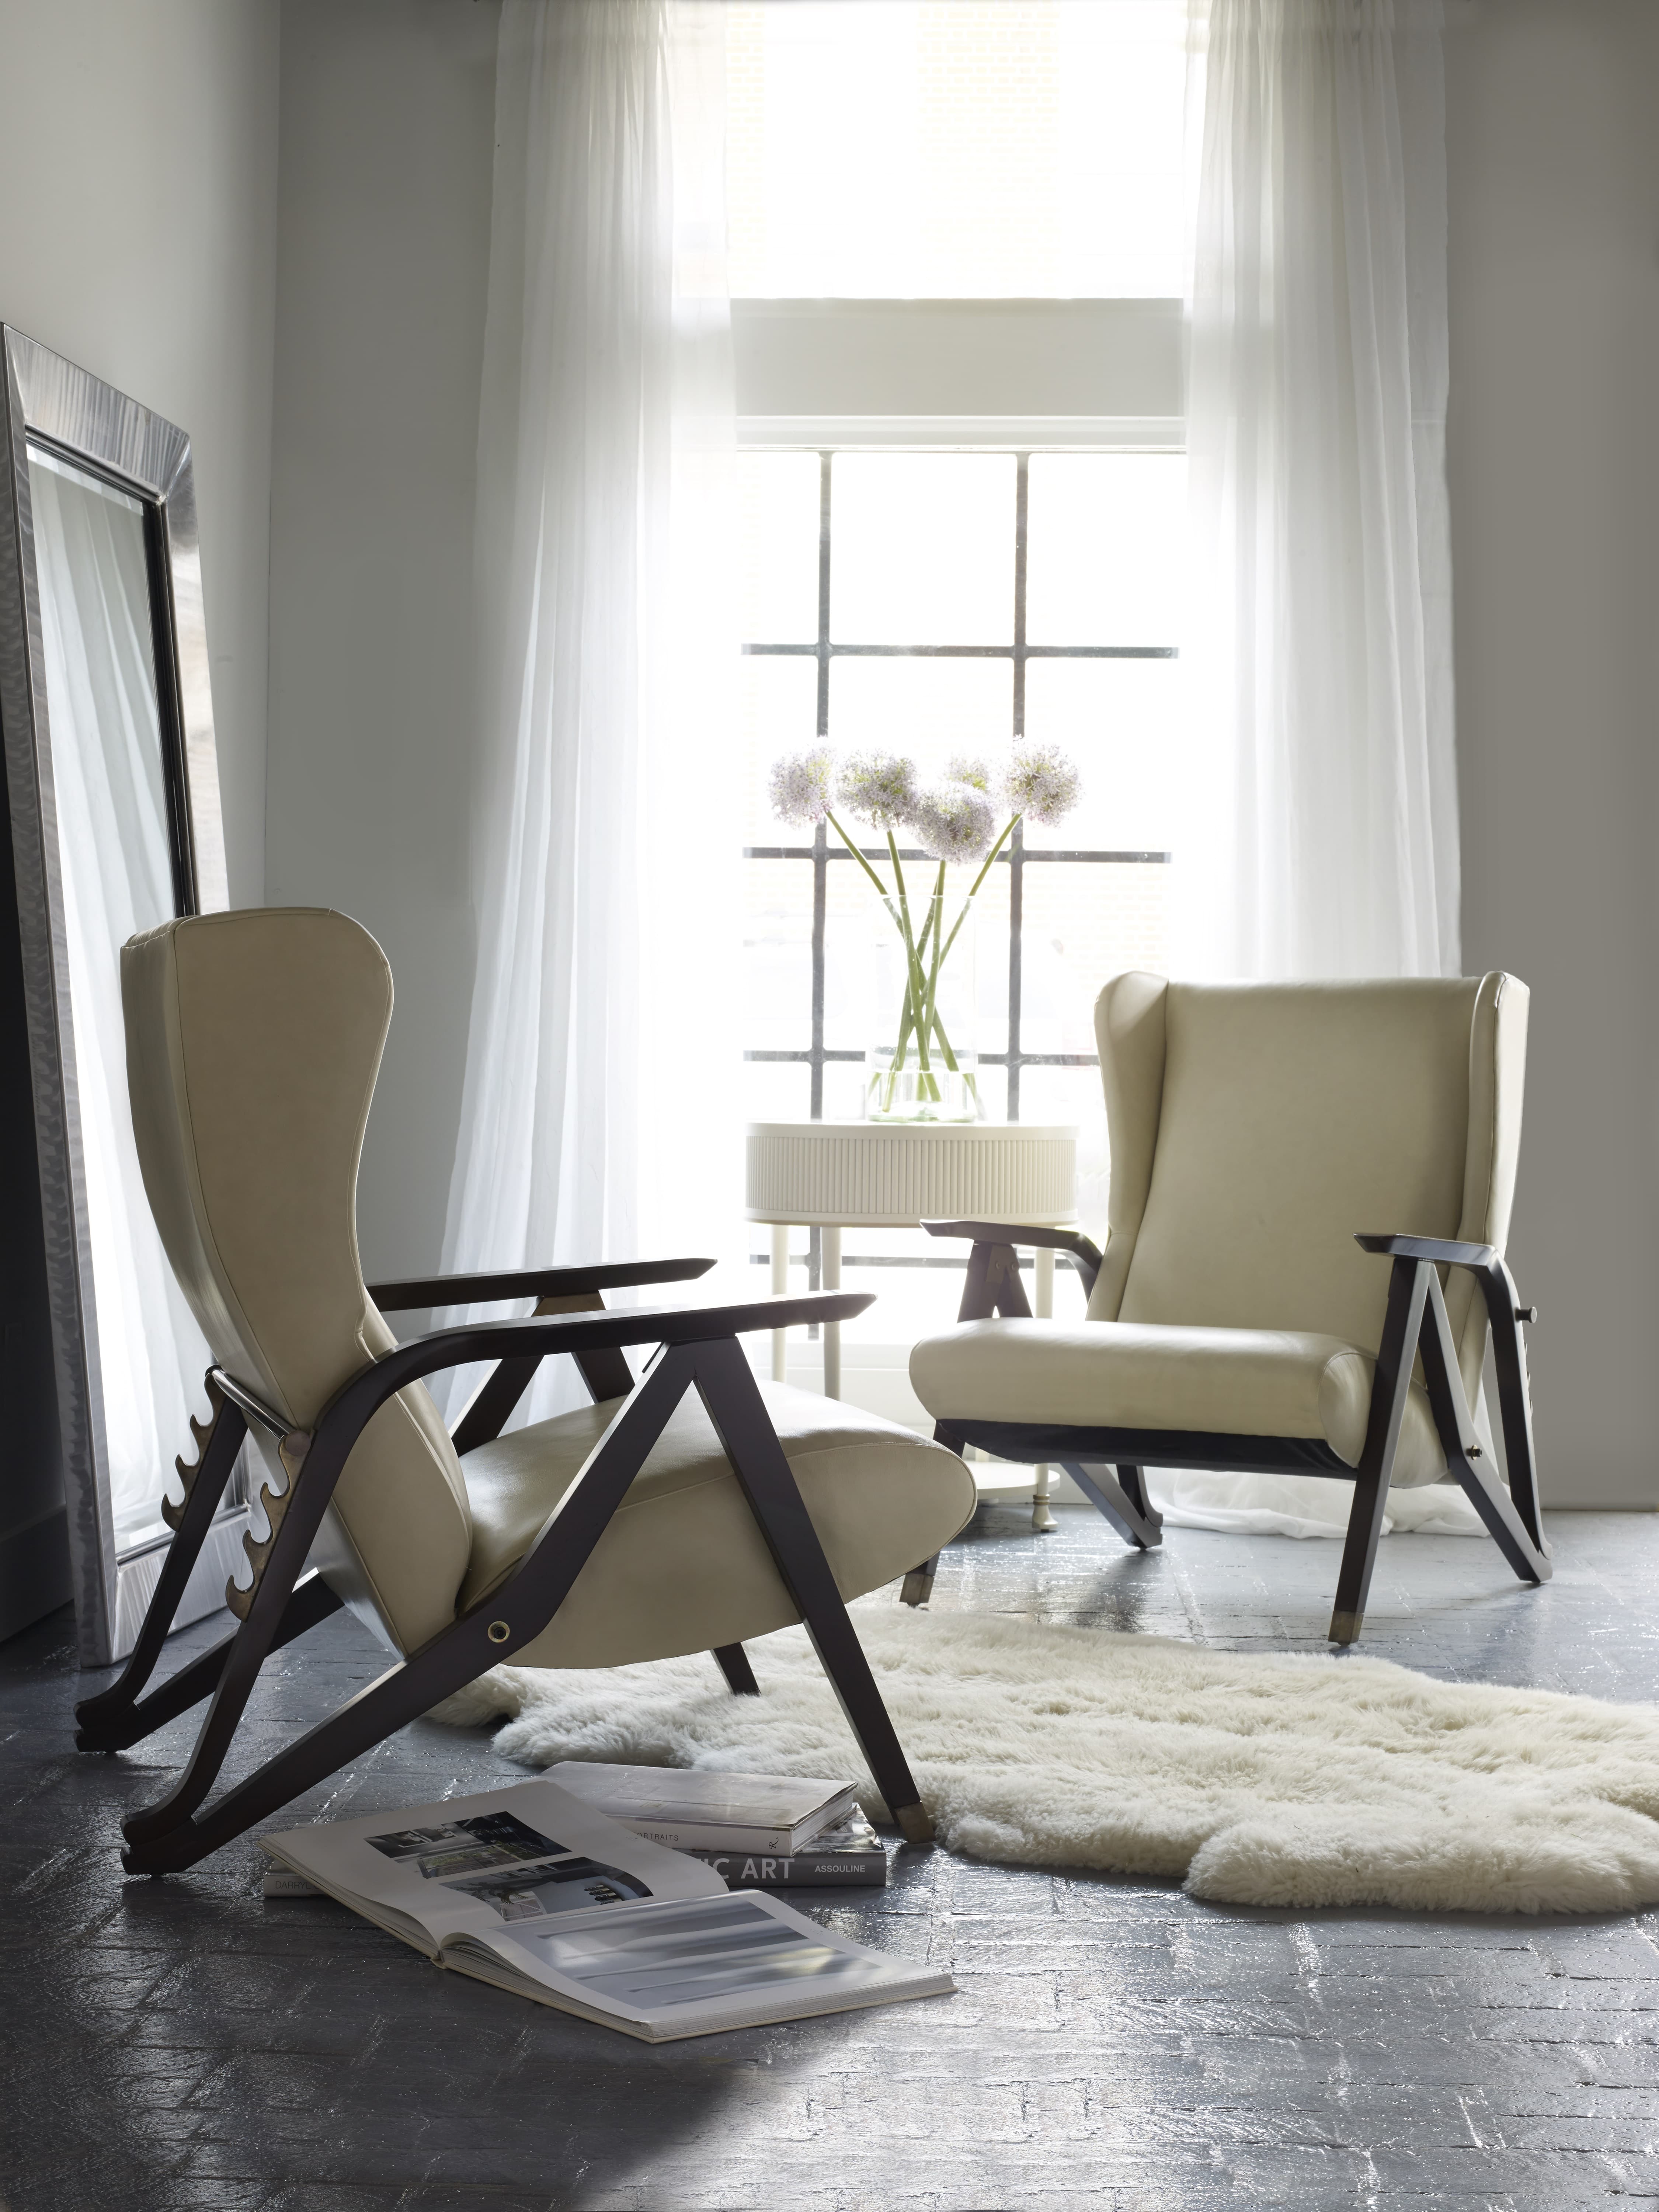 gerlock chairs designed by joni vanderslice for her j banks collection produced by stanford furniture